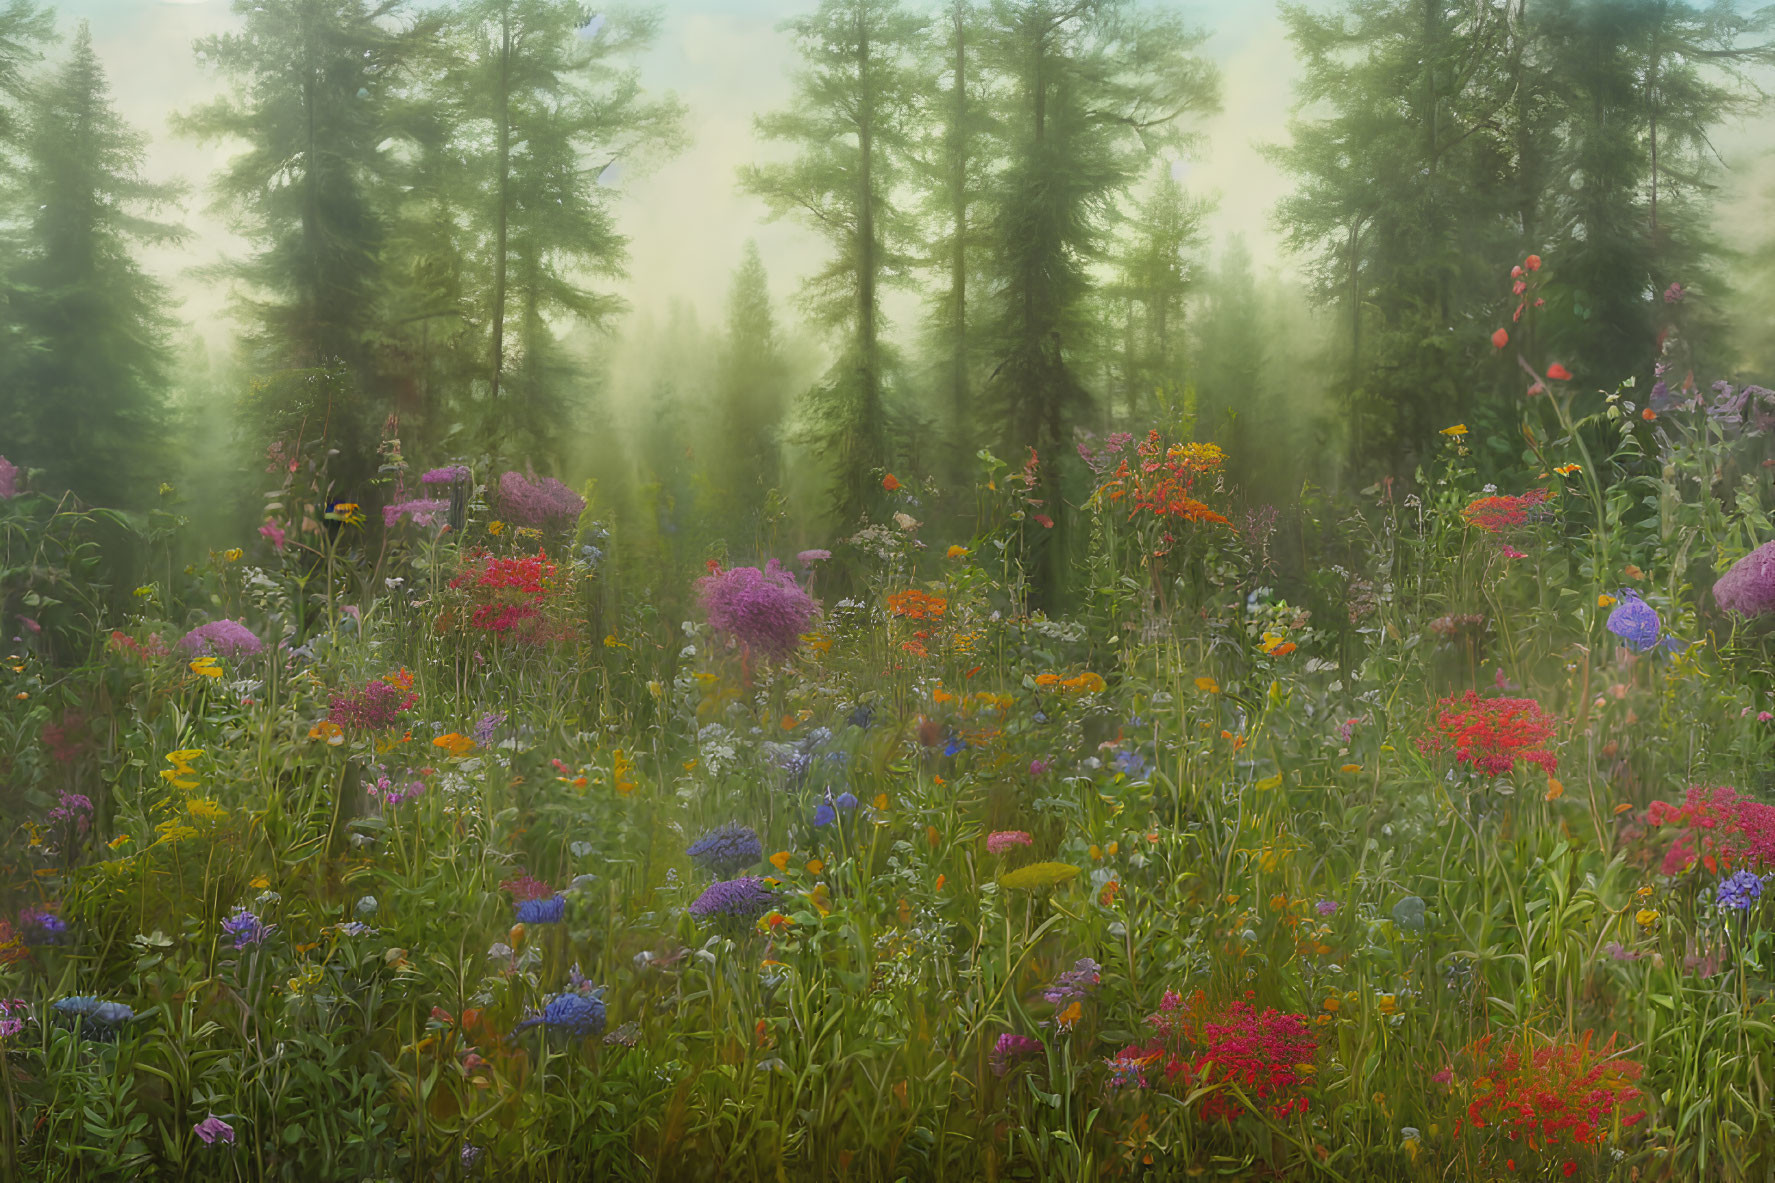 Misty meadow with vibrant wildflowers and evergreen trees in foggy backdrop